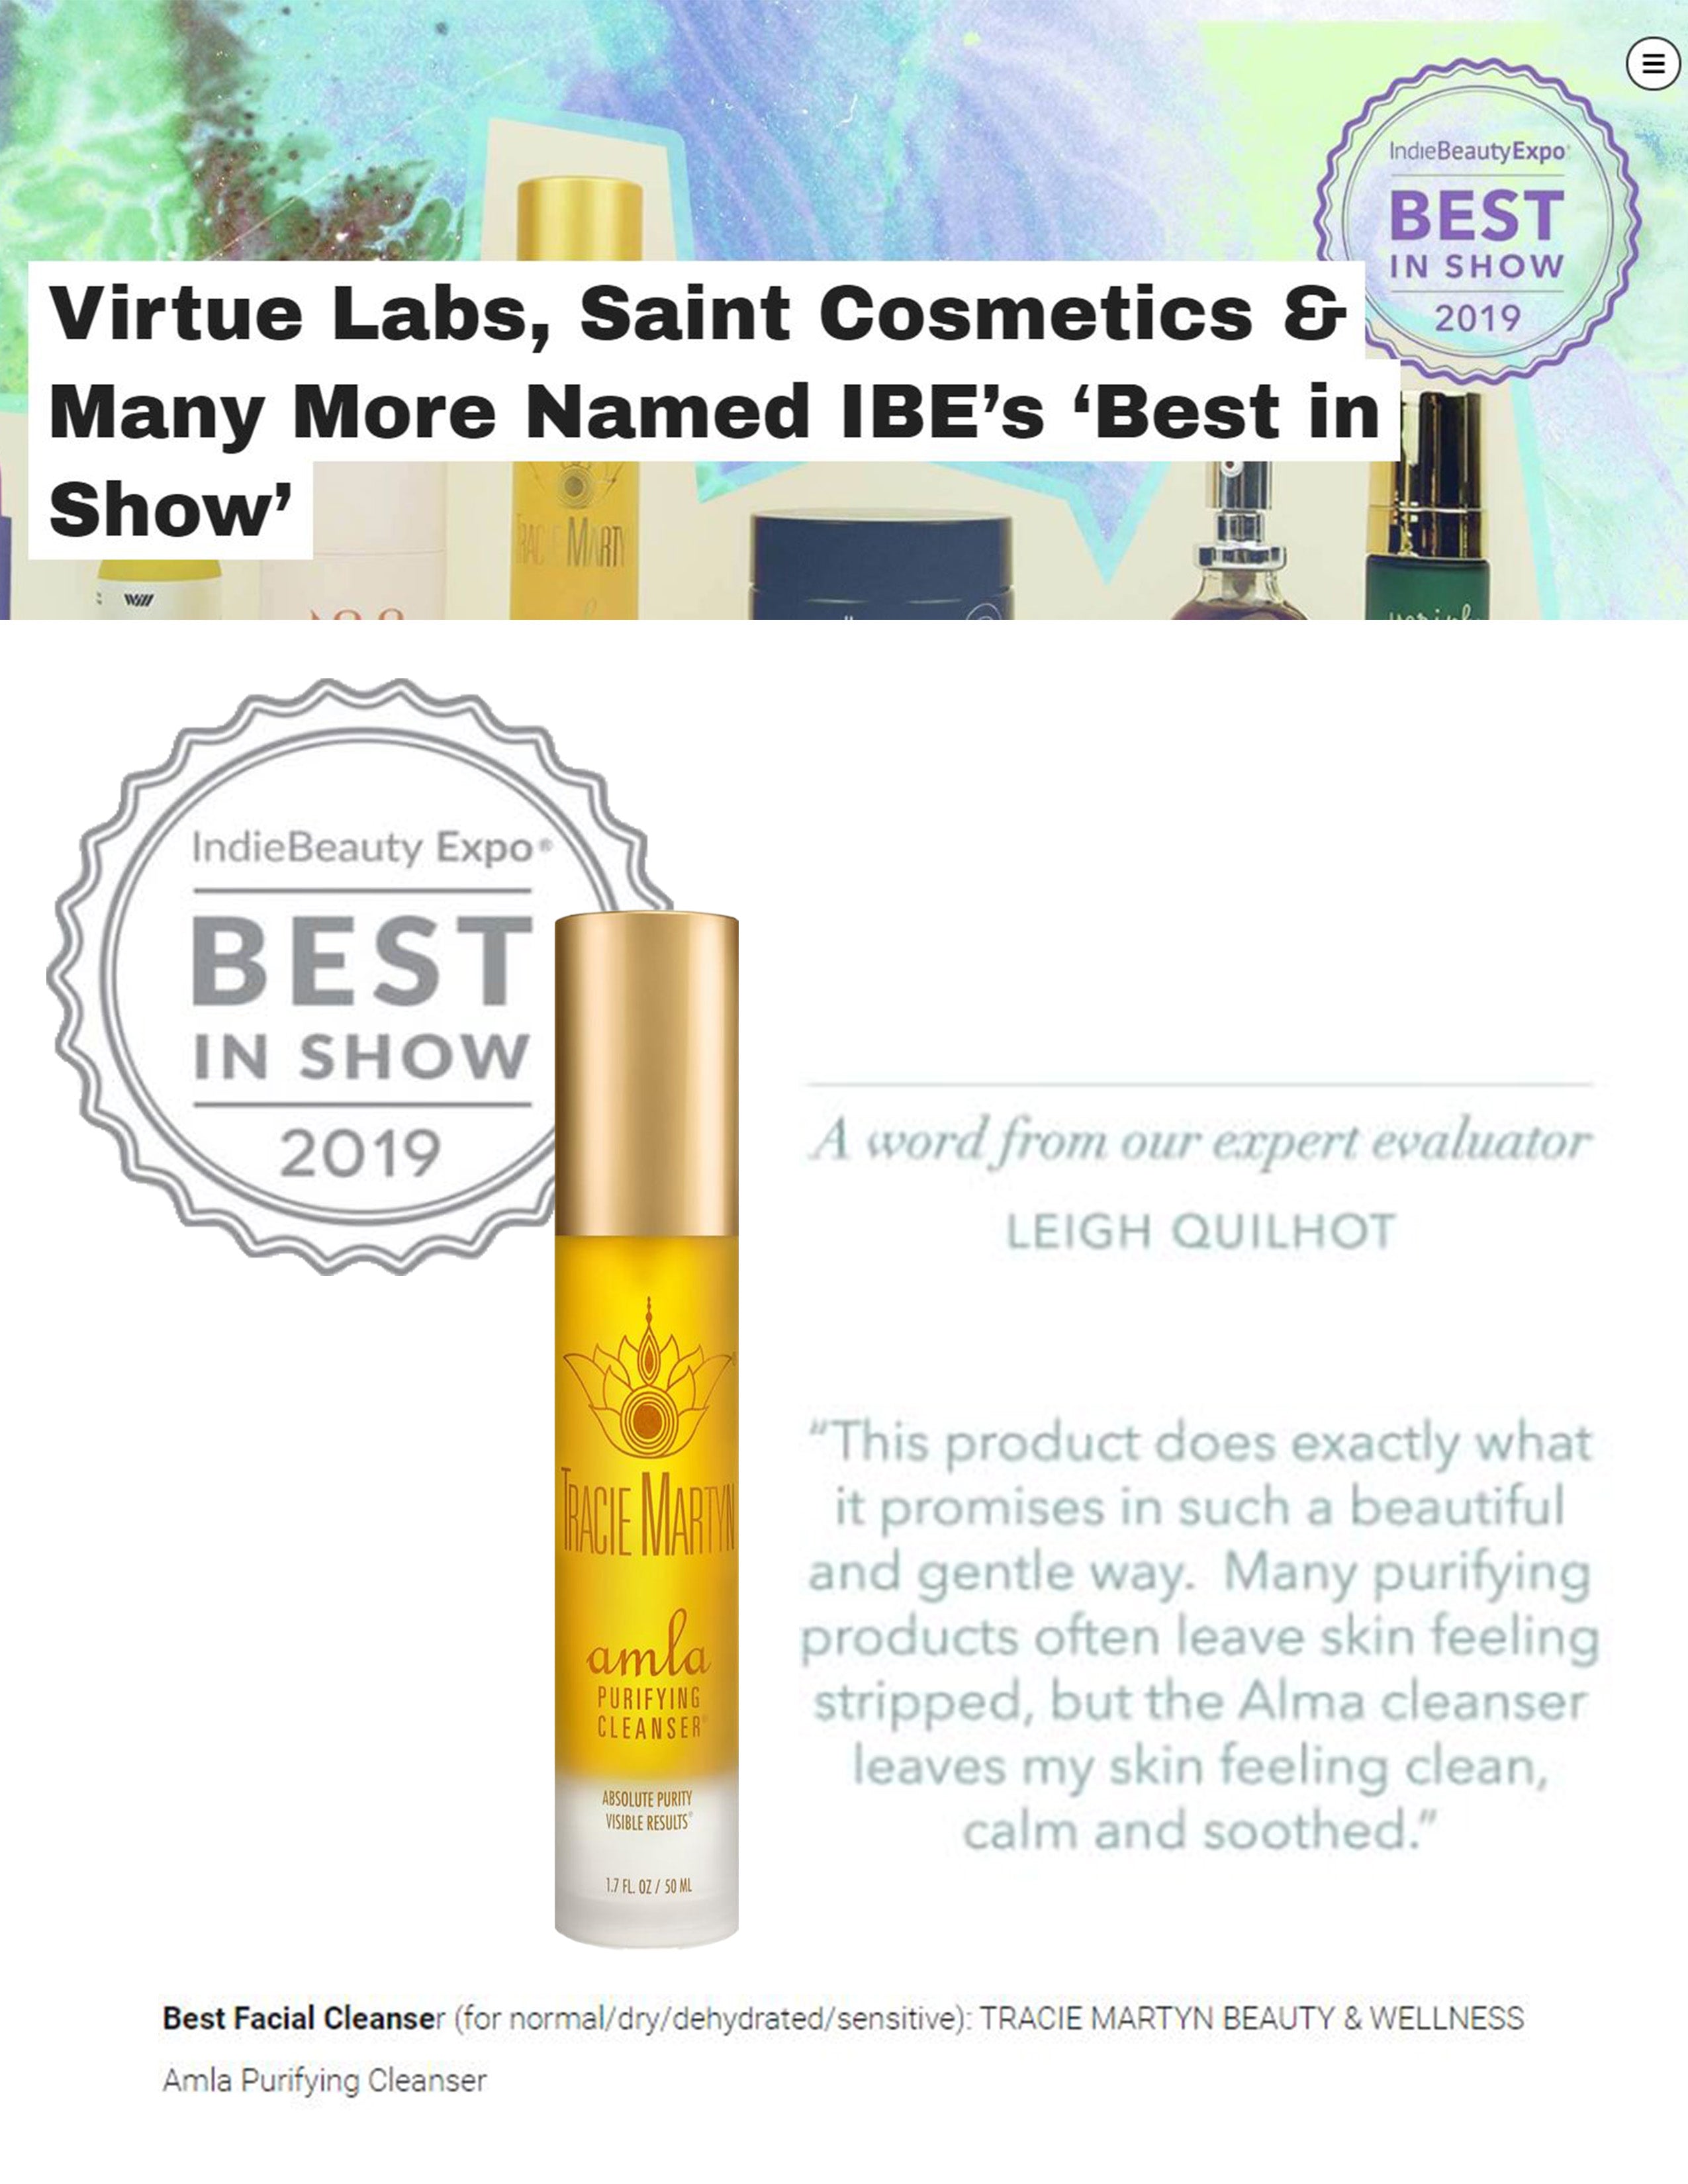 Indie Beauty Expo: Tracie Martyn Wins Best Facial Cleanser for 2019!